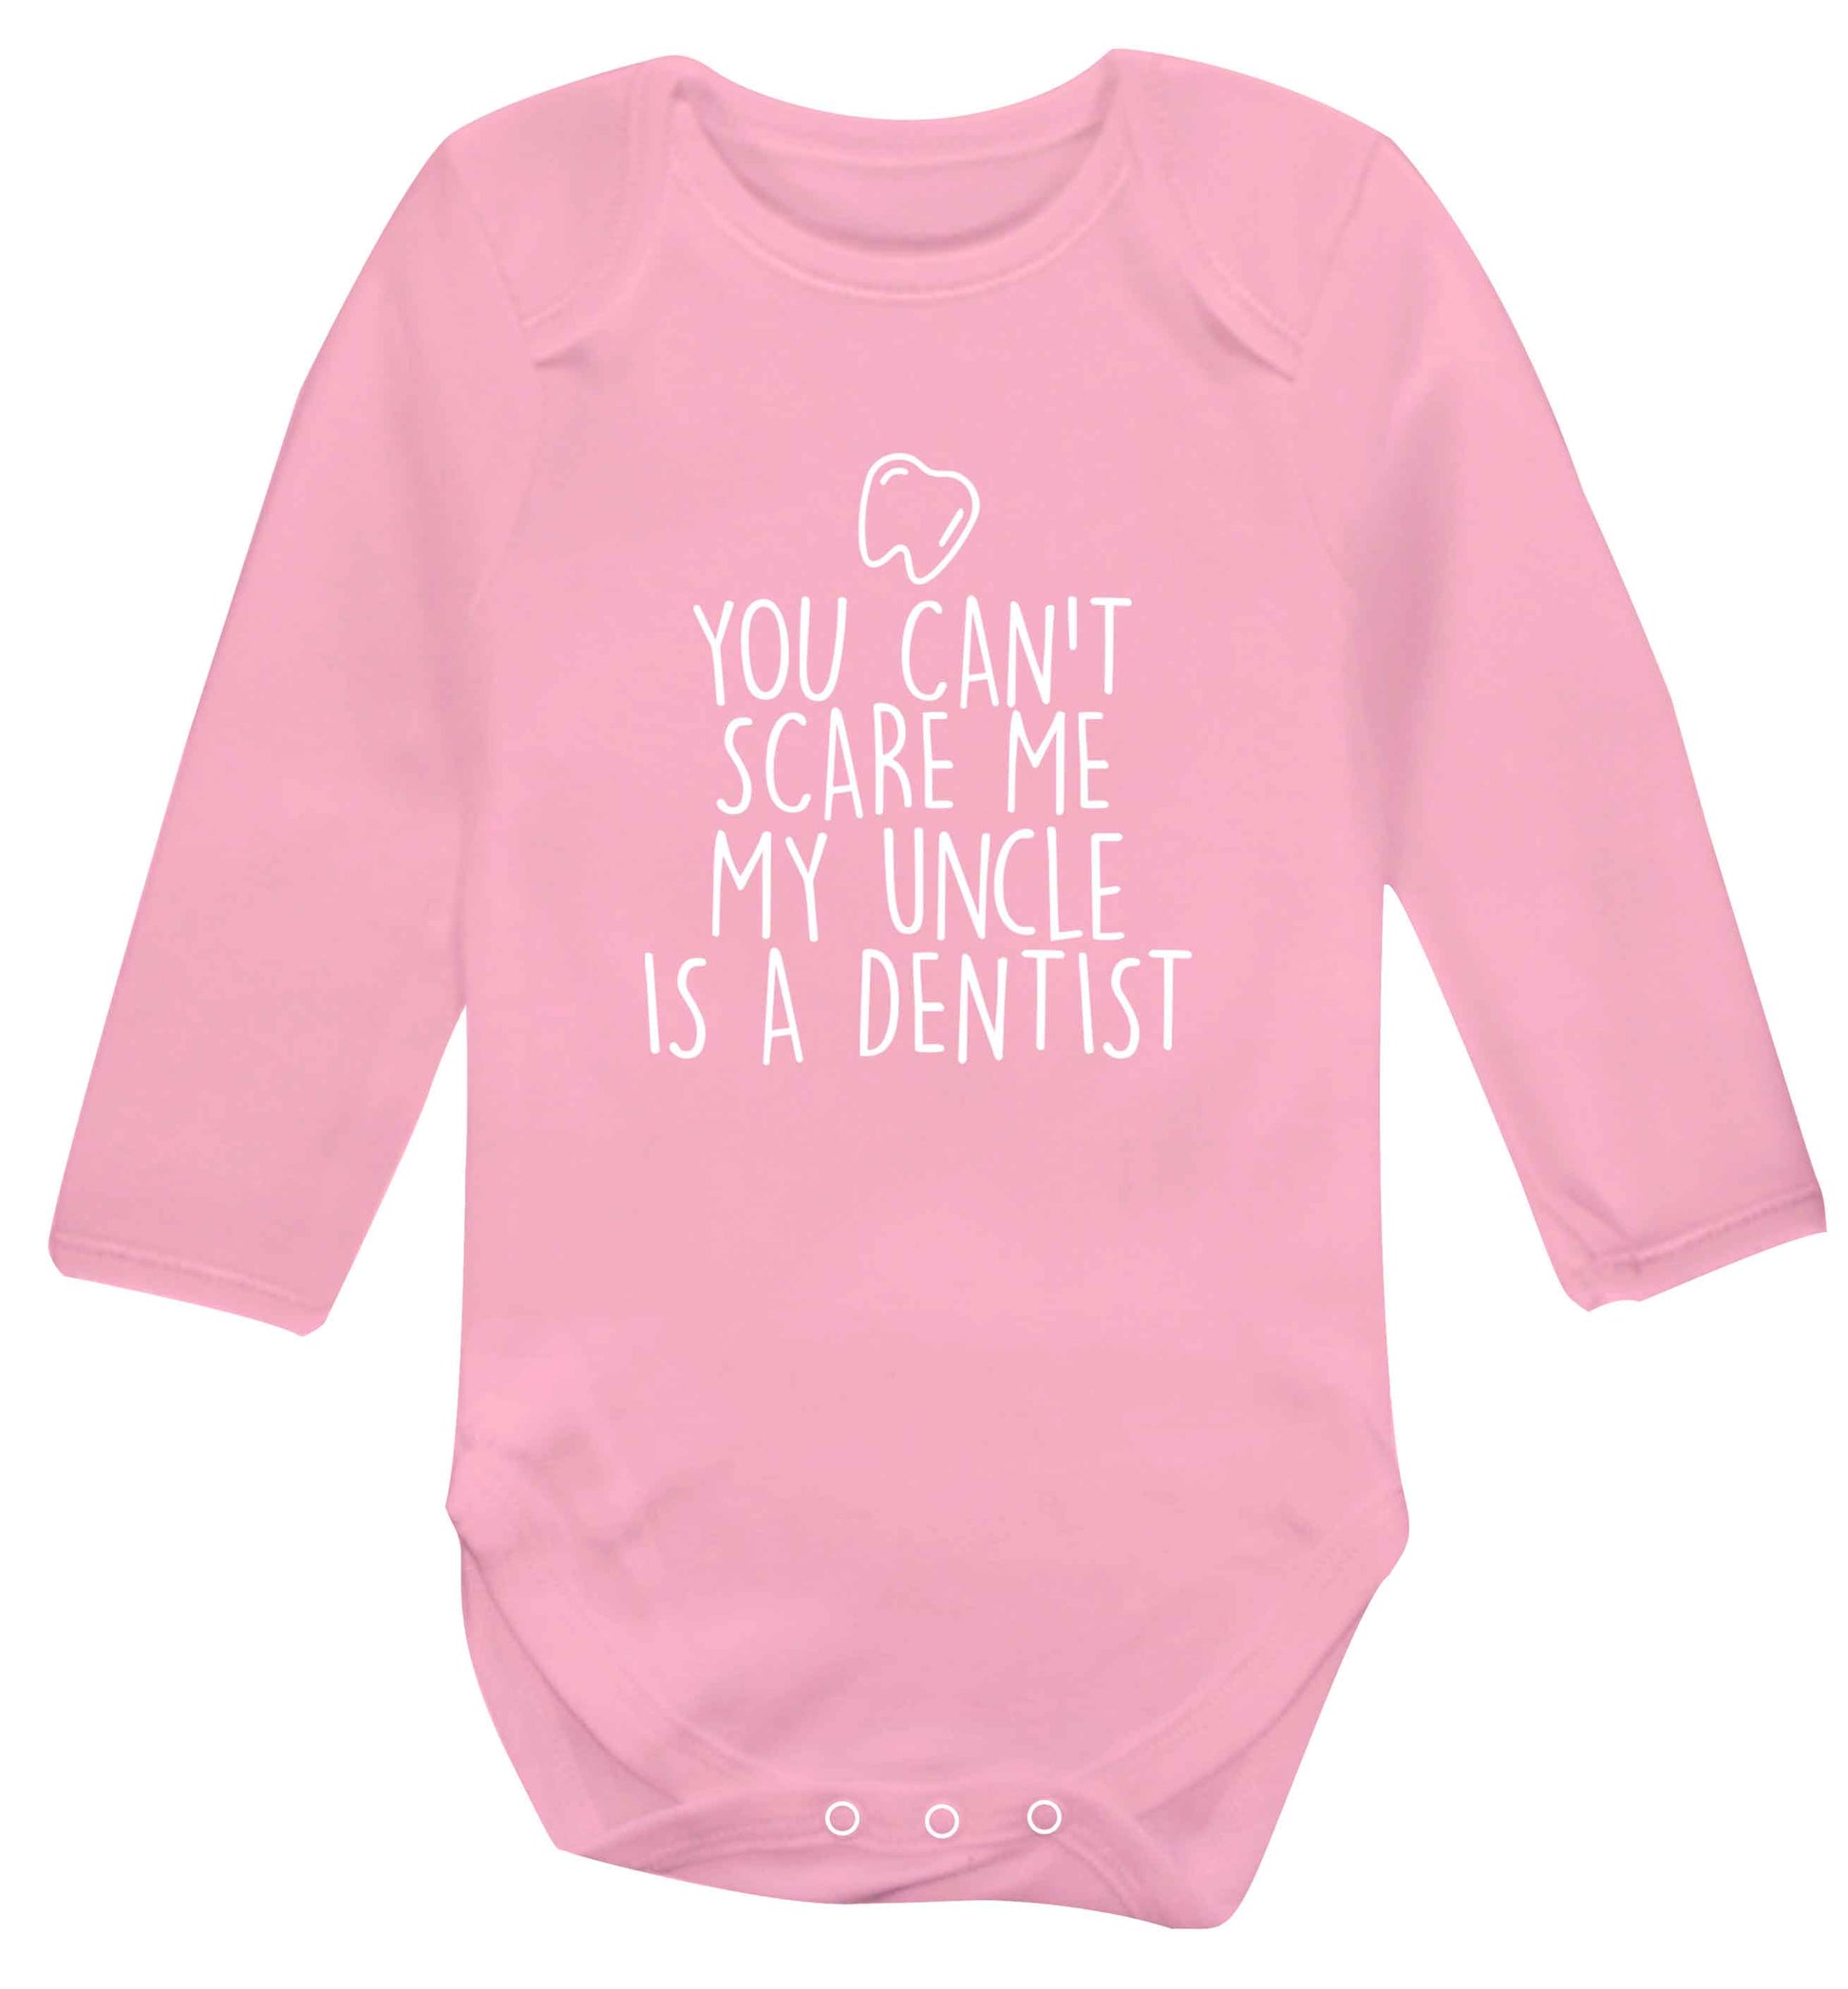 You can't scare me my uncle is a dentist baby vest long sleeved pale pink 6-12 months